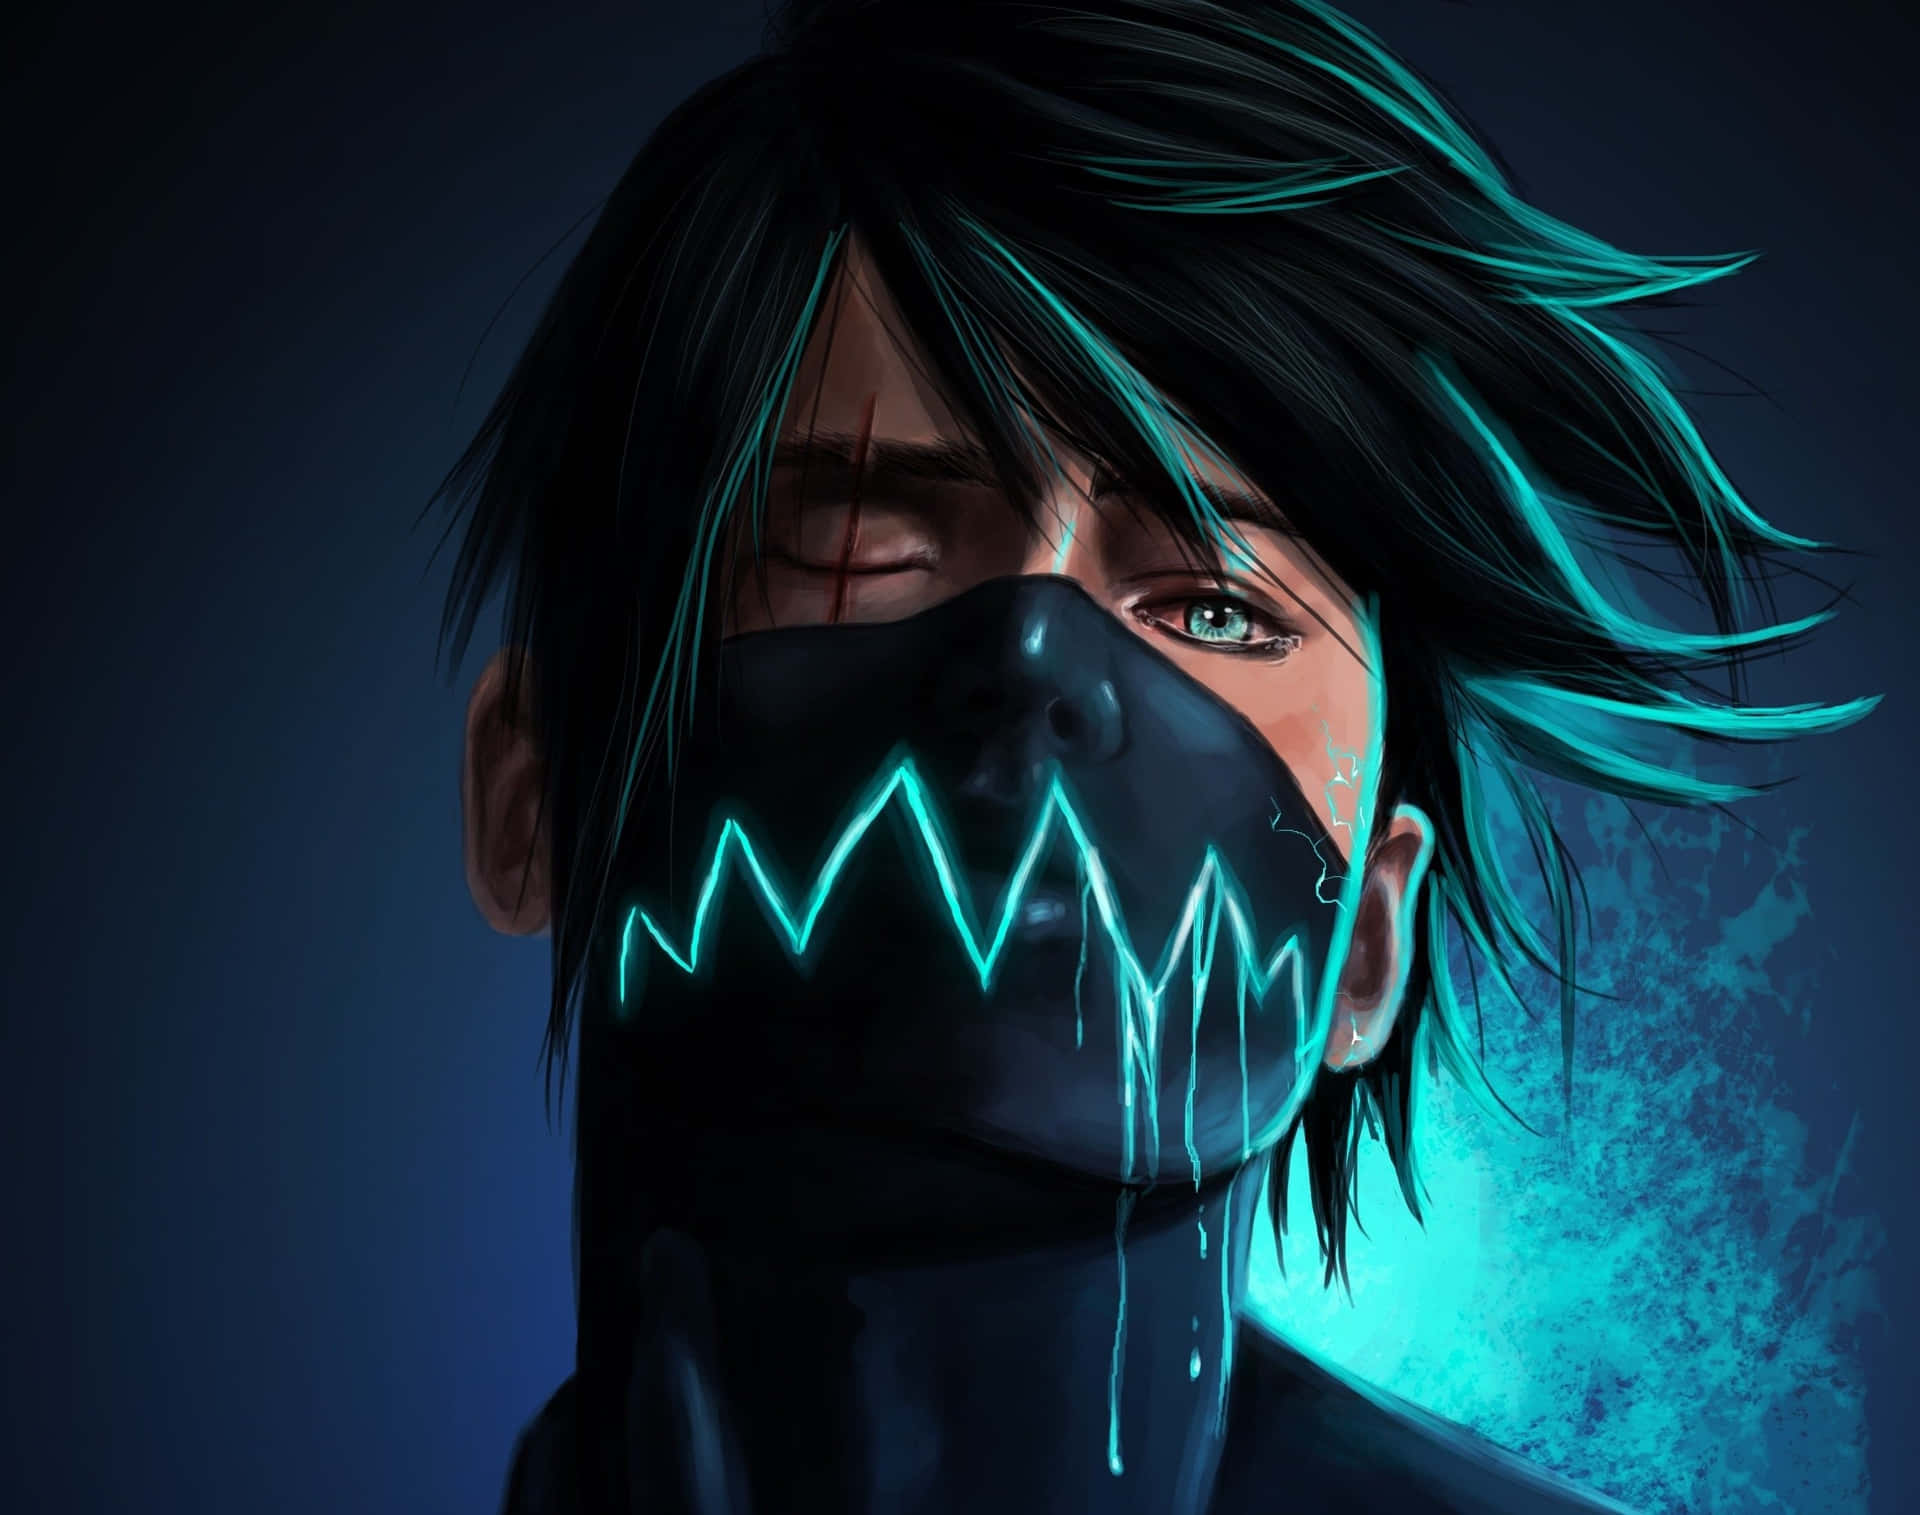 Anime Boy With Neon Mask Wallpaper